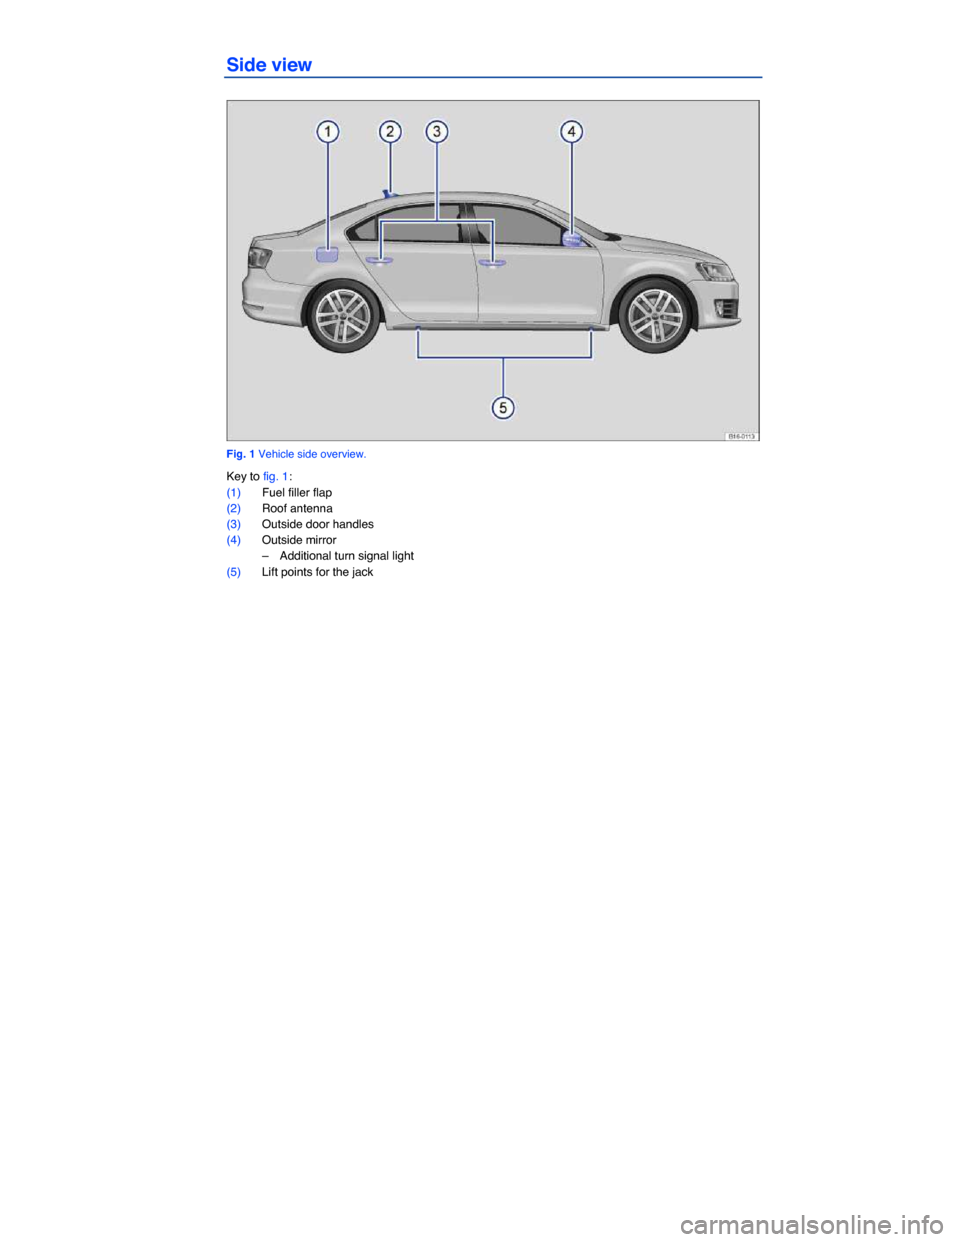 VOLKSWAGEN JETTA GLI 2013 1B / 6.G Owners Manual  
Side view 
 
Fig. 1 Vehicle side overview. 
Key to fig. 1: 
(1) Fuel filler flap  
(2) Roof antenna  
(3) Outside door handles  
(4) Outside mirror  
–  Additional turn signal light  
(5) Lift poi